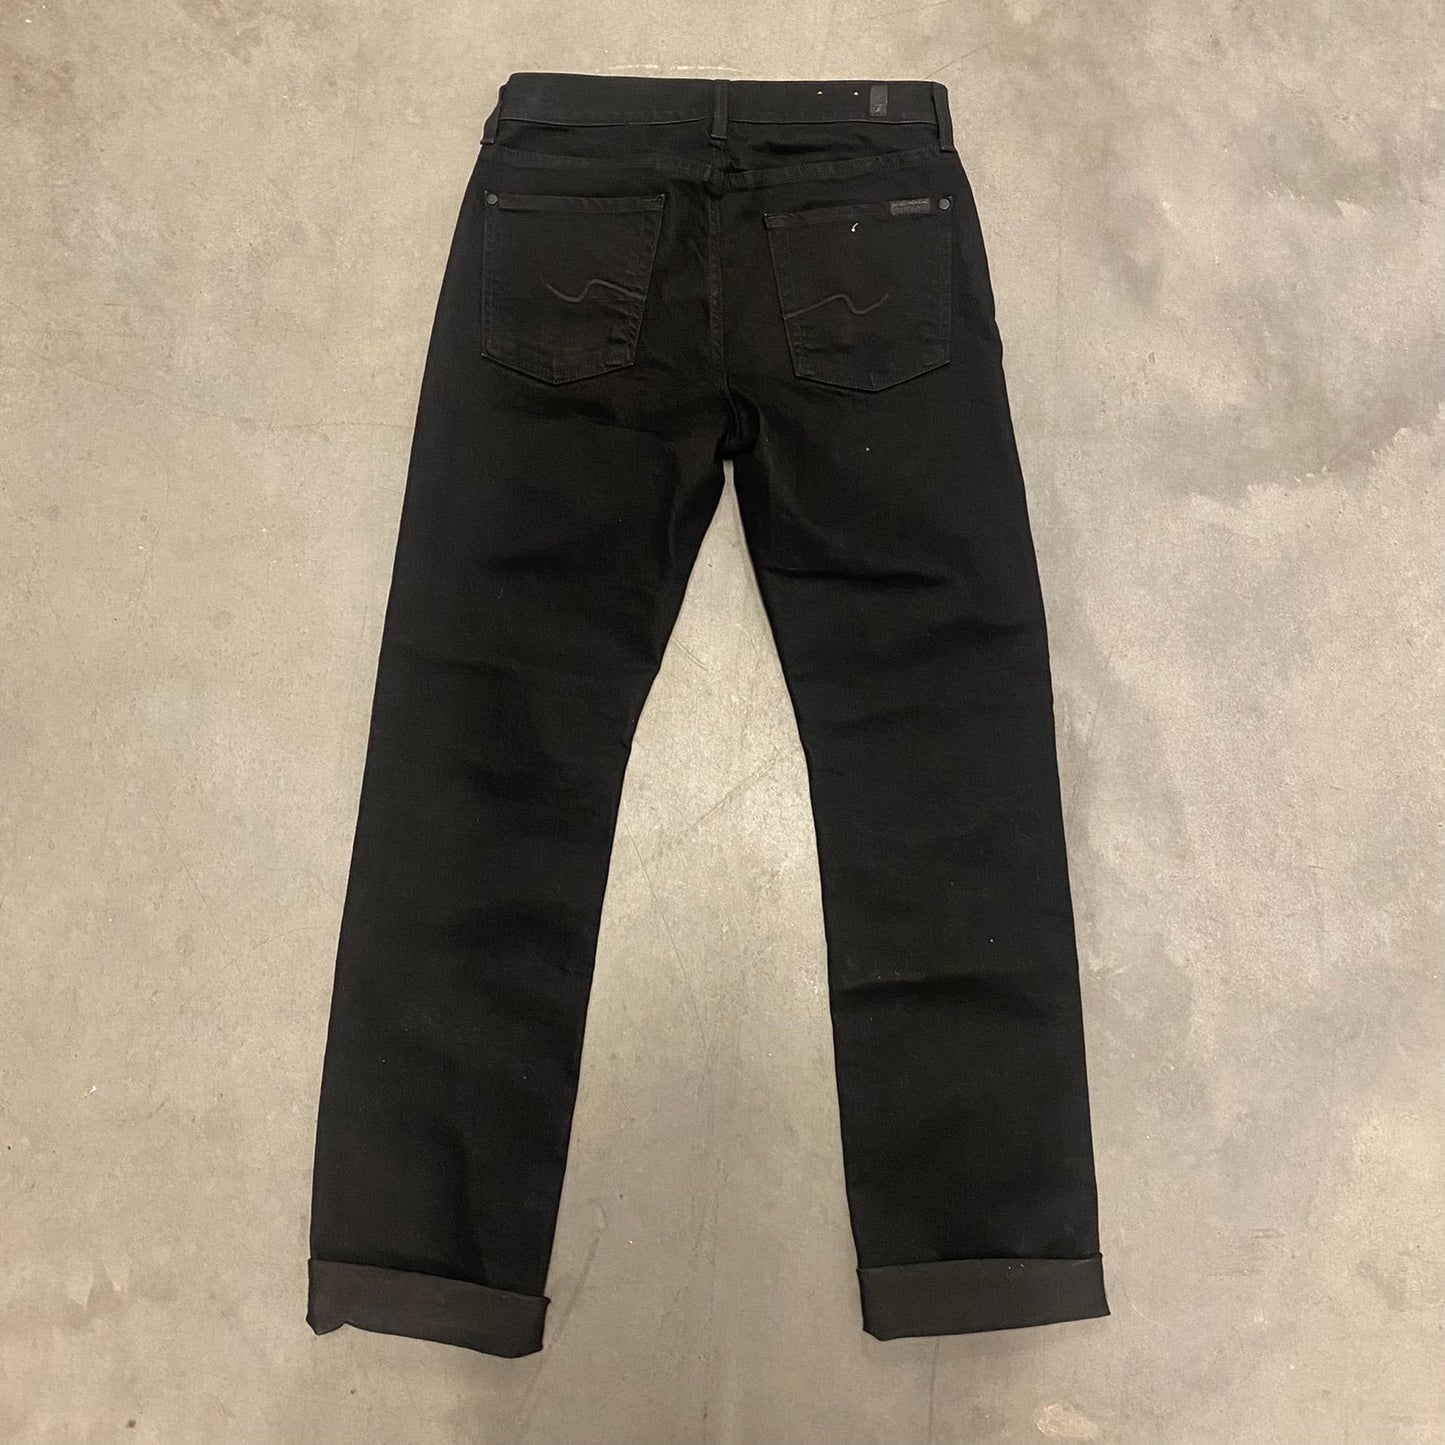 7 For All Mankind Slim Jeans